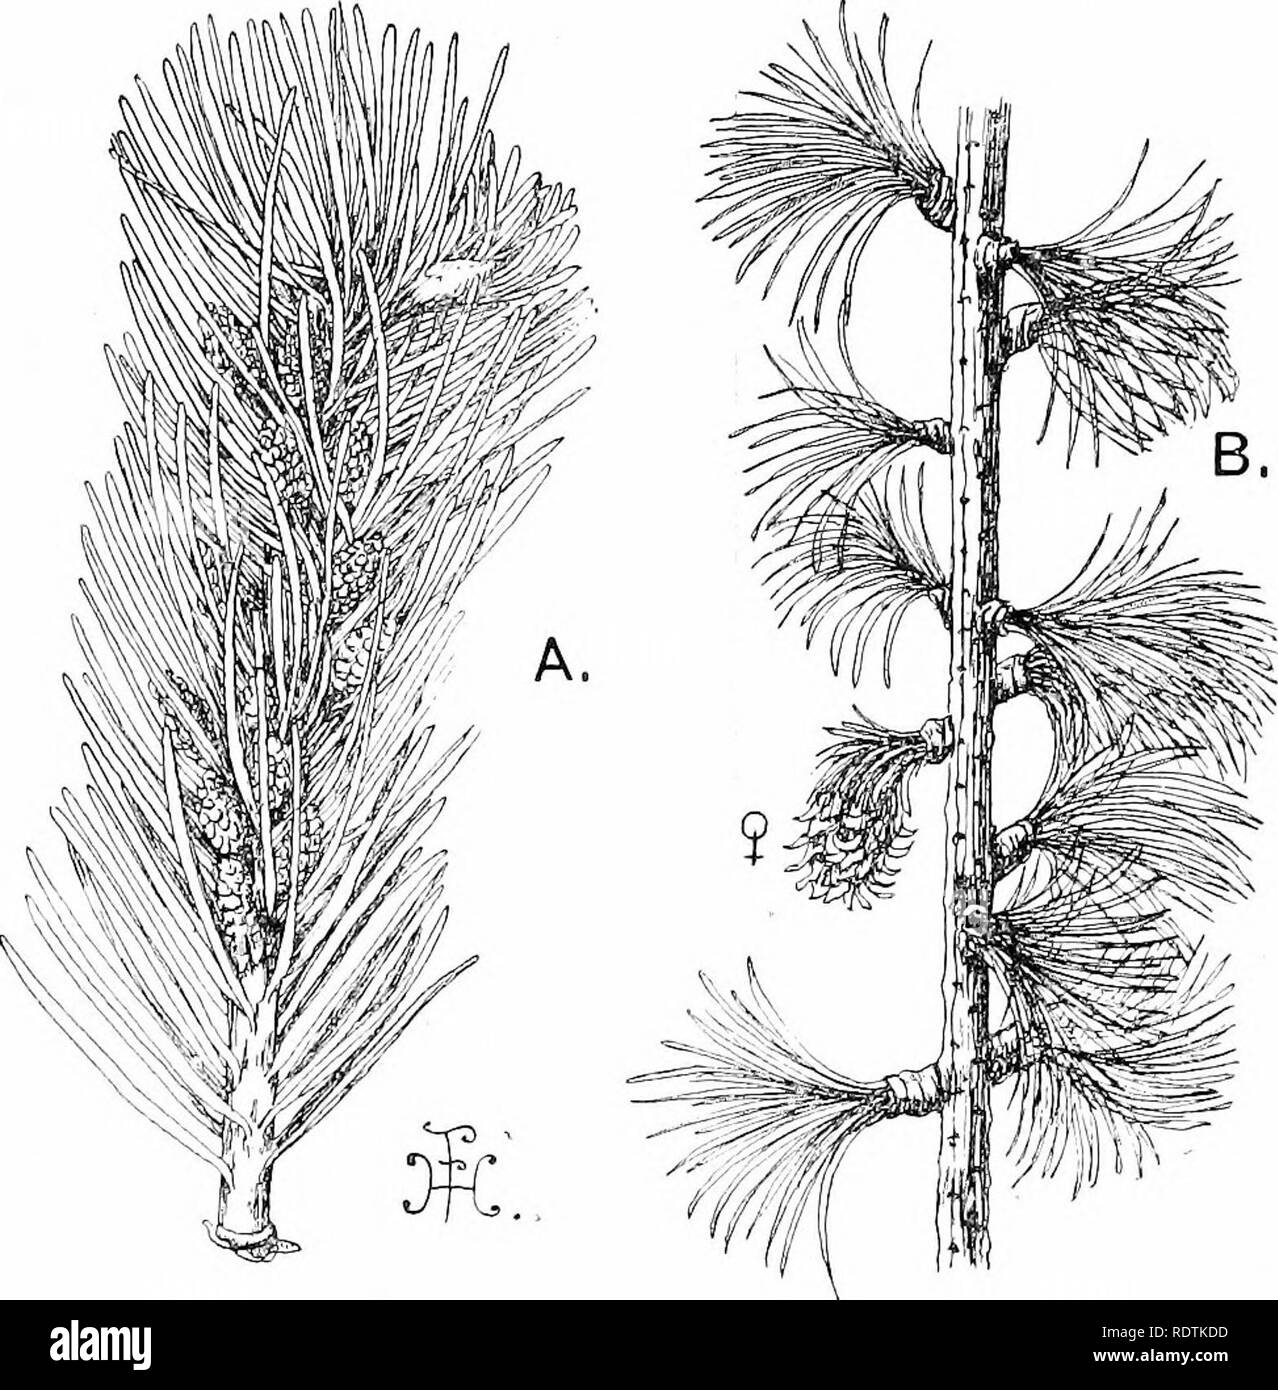 . An introduction to the structure and reproduction of plants. Plant anatomy; Plants. 336 HABlt AND FOLIAGE Picea) ; iii the Scotch Fir similar scars are left by the decurrent bases of the dwarf-shoots. The pecuhar appearance of the Arbor Vita [Thuja, Fig. 194) and the Cypress {Cupressus), both belonging to the Cupressineae, is due to the presence of minute leaves arranged in decussate pairs, and almost fused with the stem upon which they are. Fig. 193.—A, Branch of Silver Fir (Abies) Viith-vaaXe cones. B, Branch of the Larch (Lafix), showing several dwarf-shoots, one of them bearing a young f Stock Photo